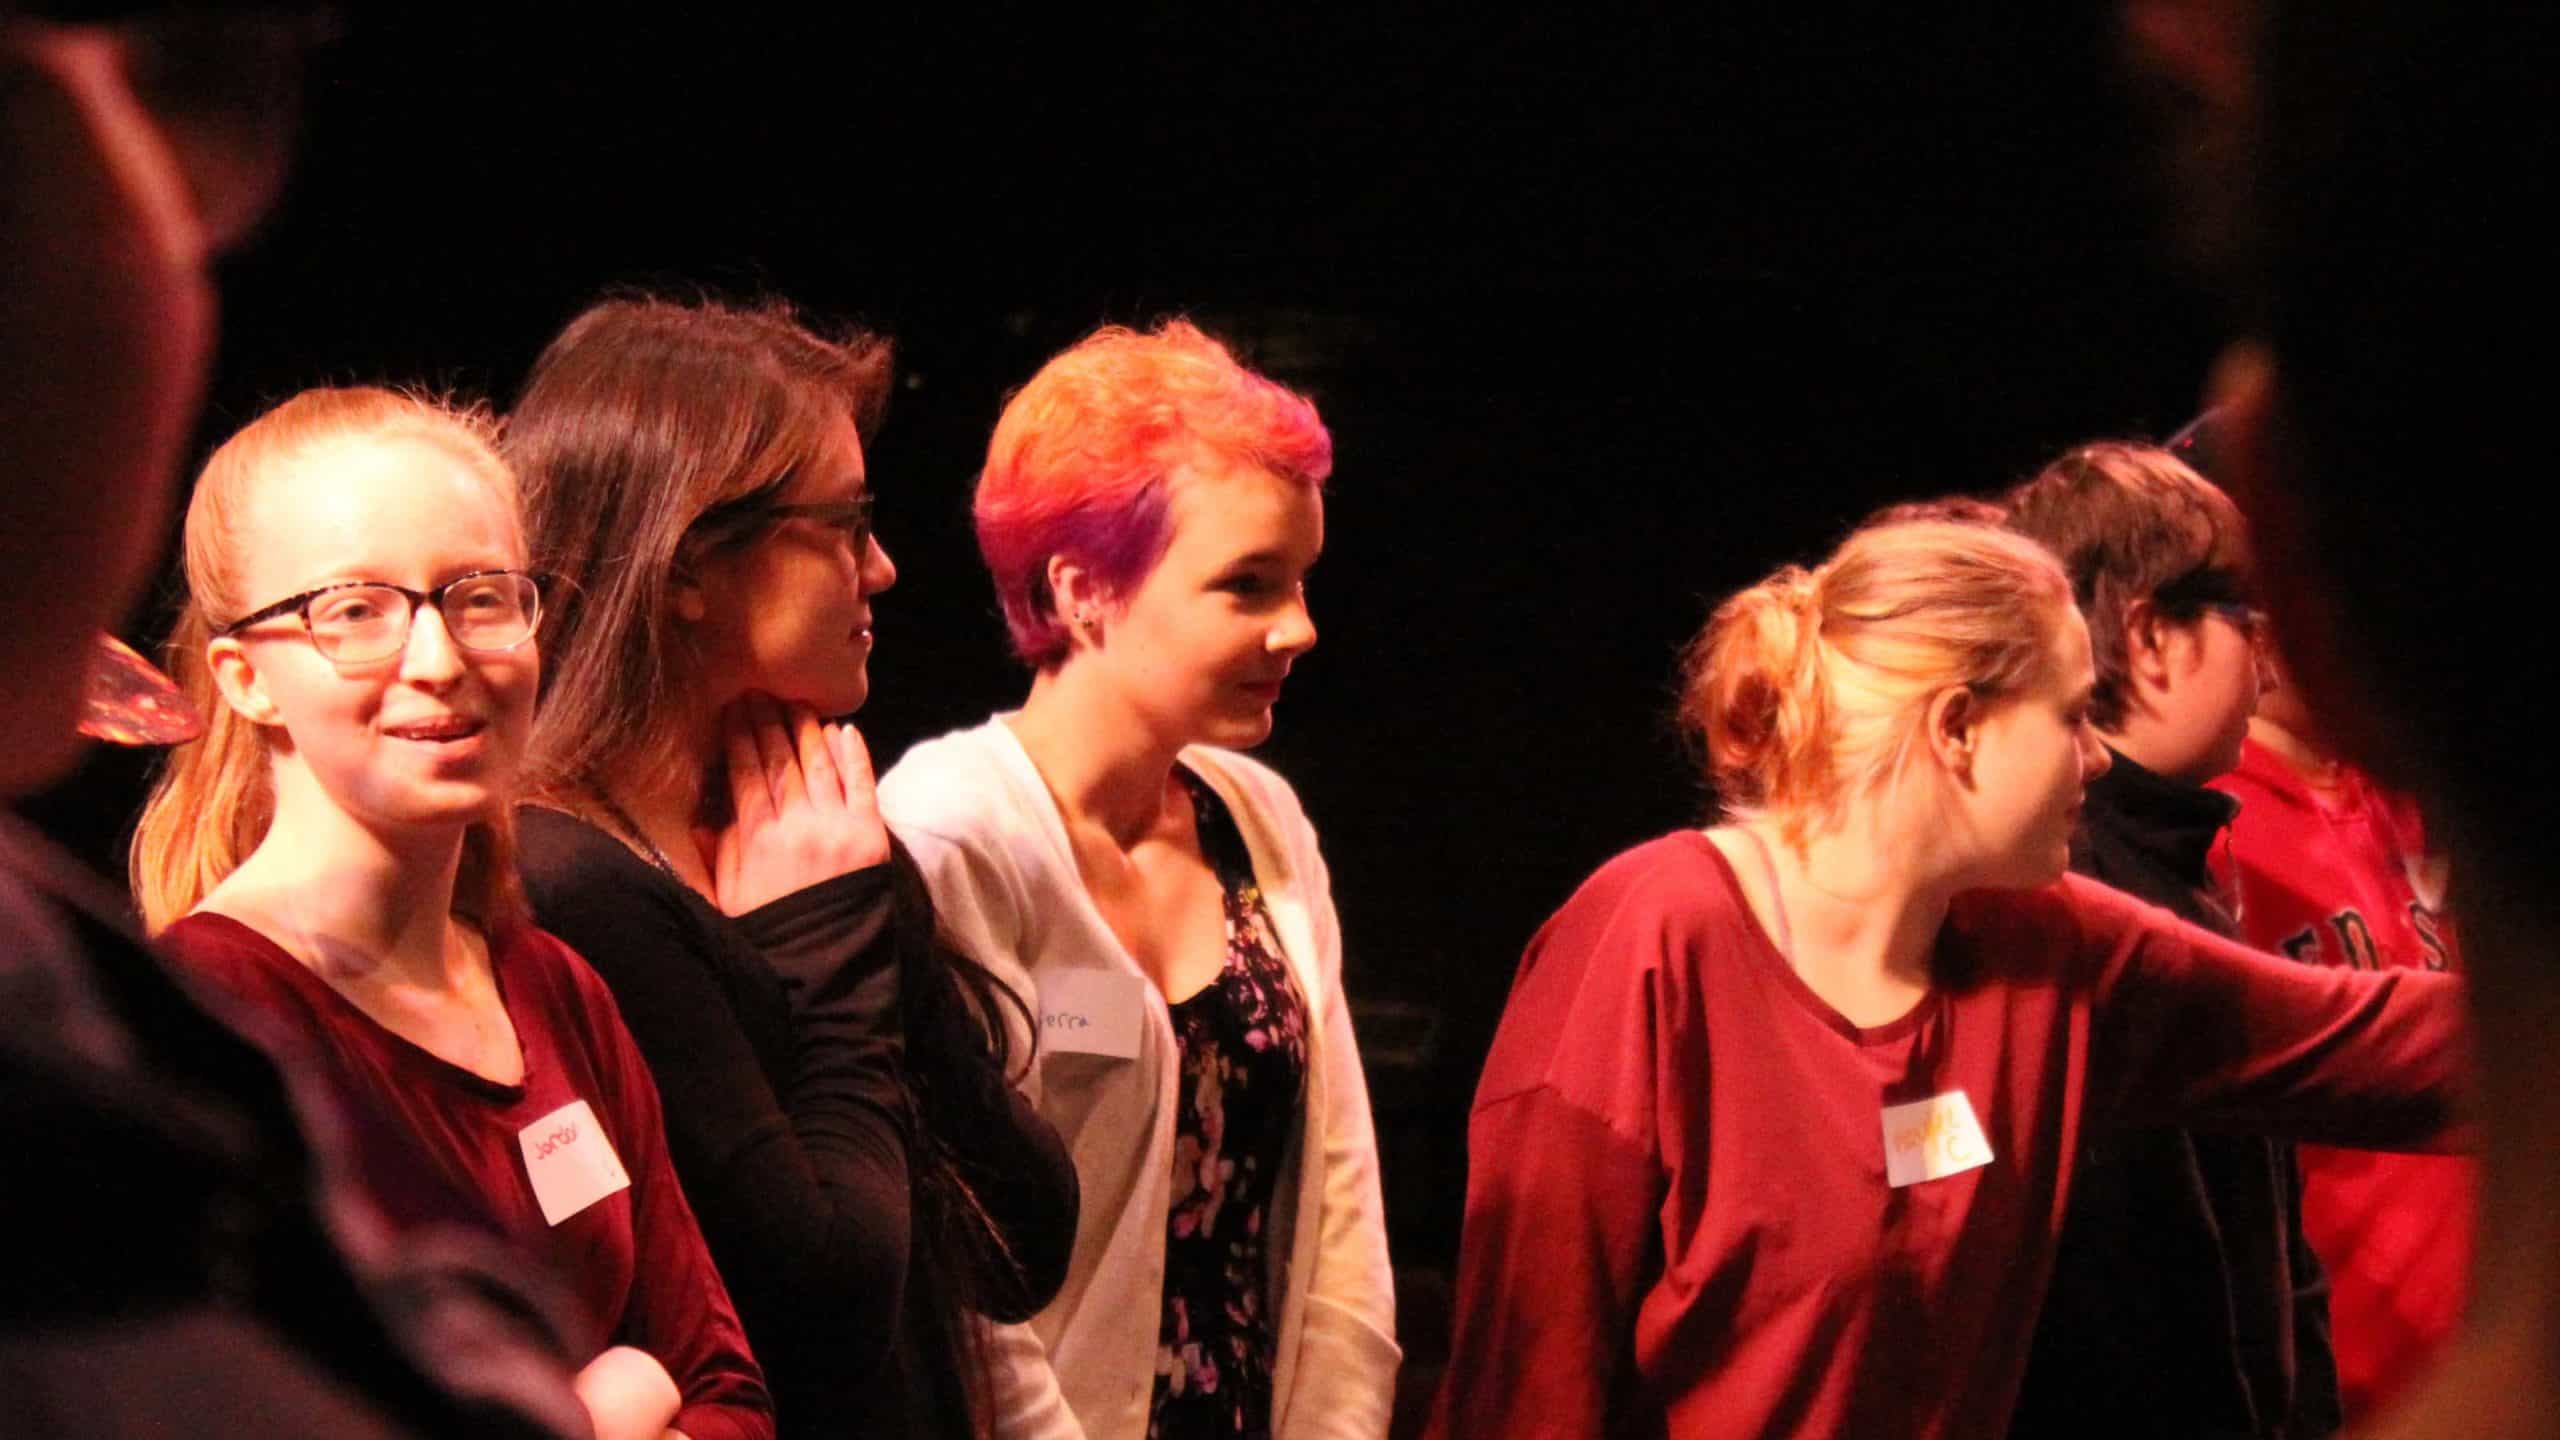 Berkshire teen actors rehearse with Barrington Stage Company's Playwright Mentoring Program (in 2017). Press photo courtesy of Barrington Stage Company.